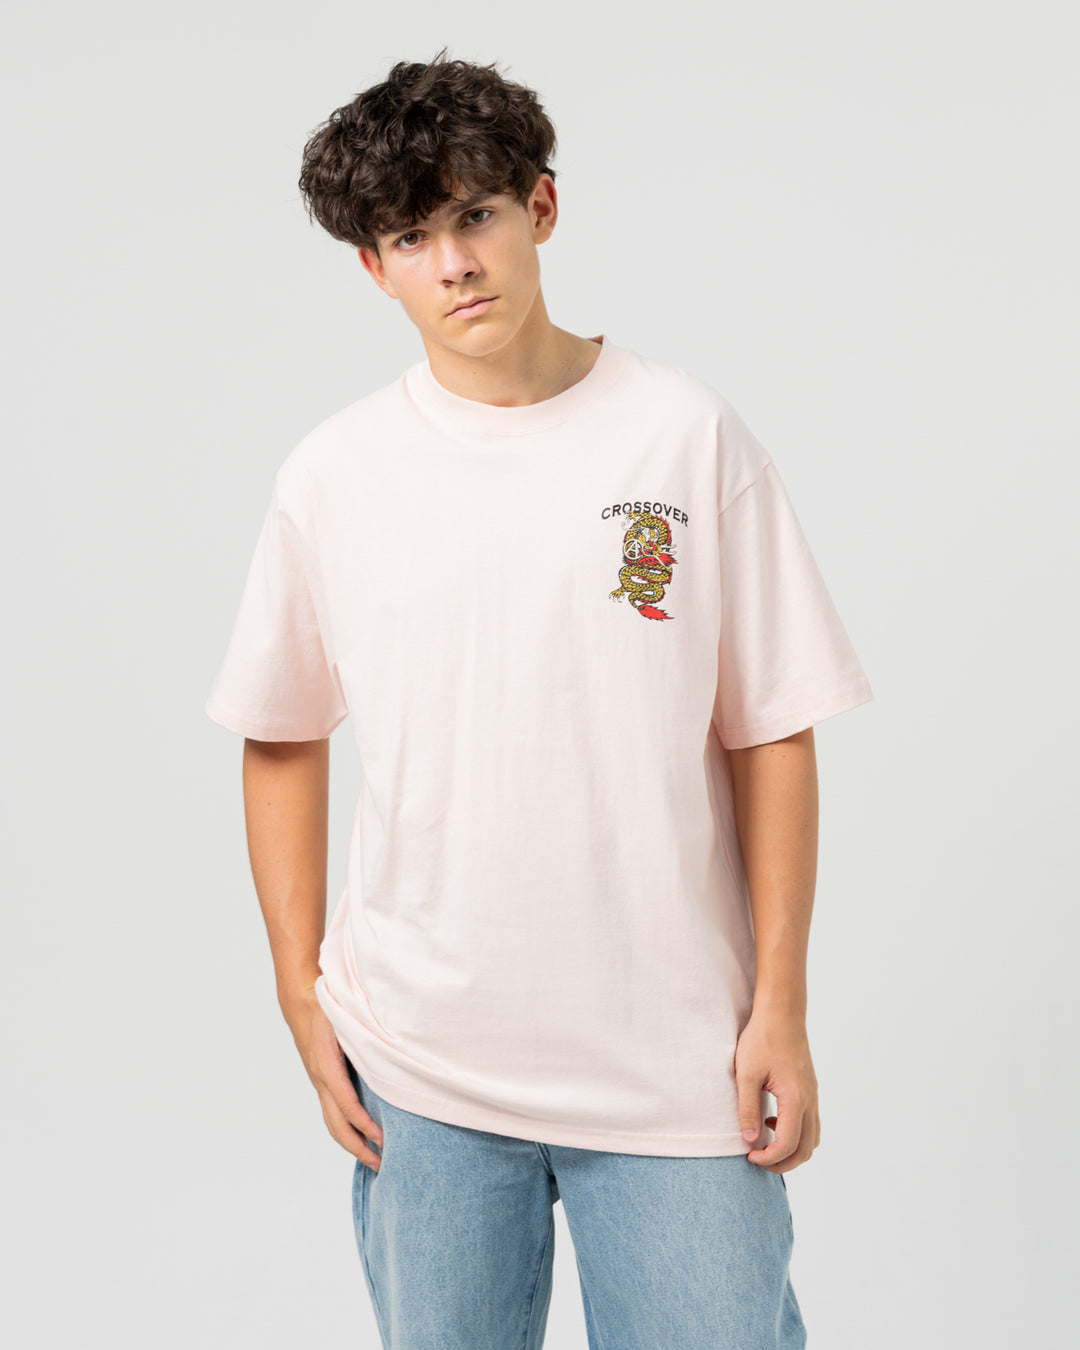 CROSSOVER "Year Of The Dragon" Tee | Pink